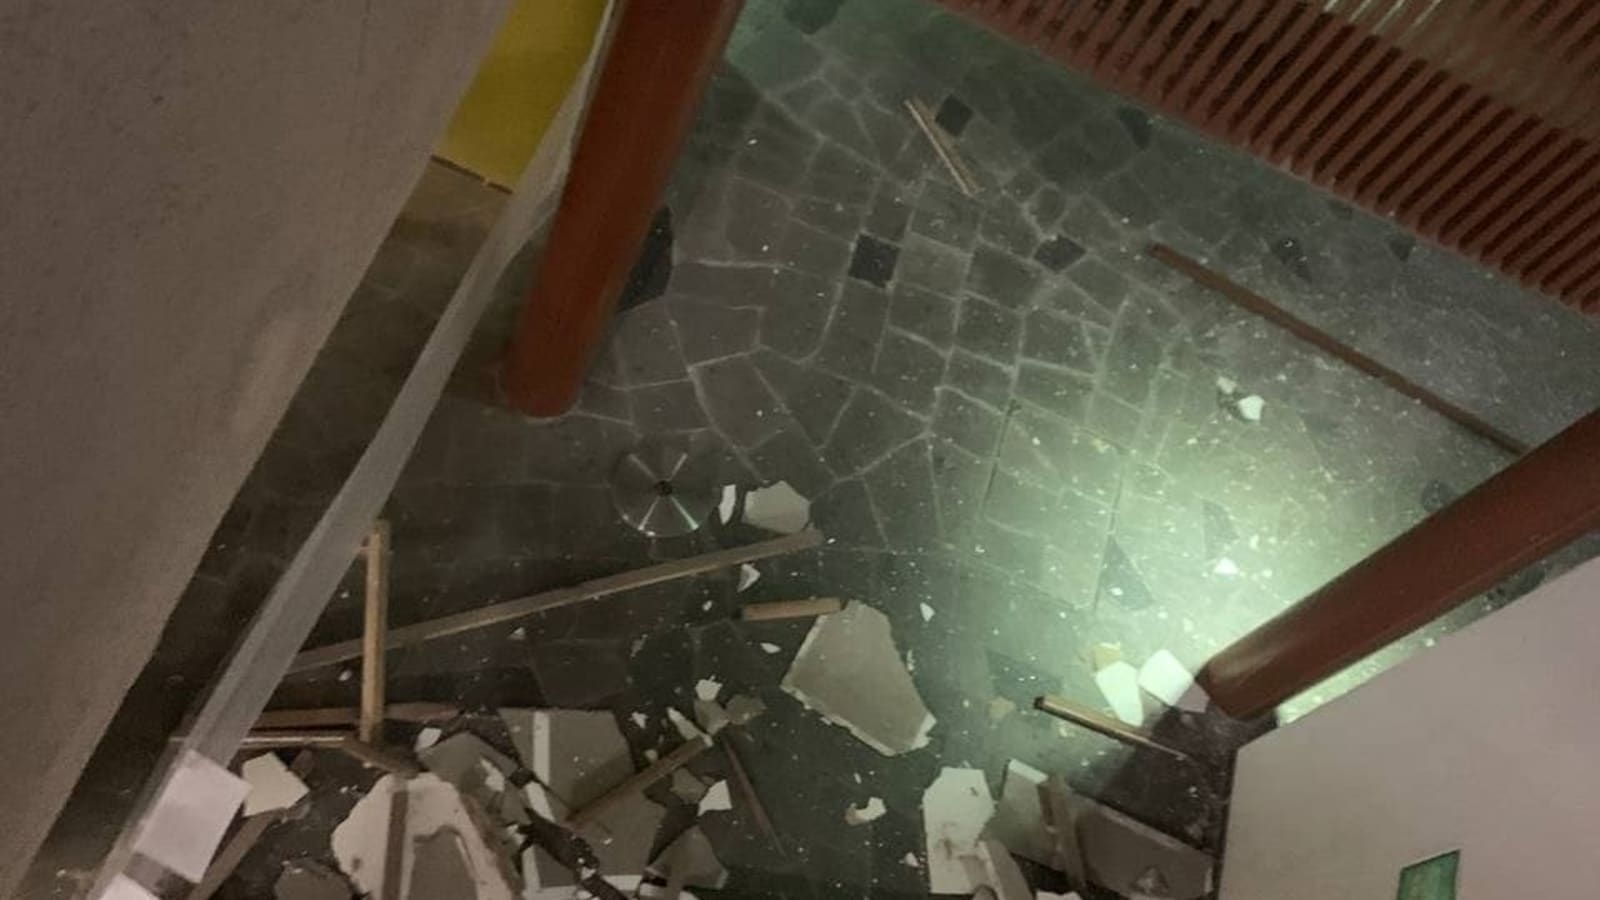 false-ceiling-collapses-at-ntu,-no-injuries-reported